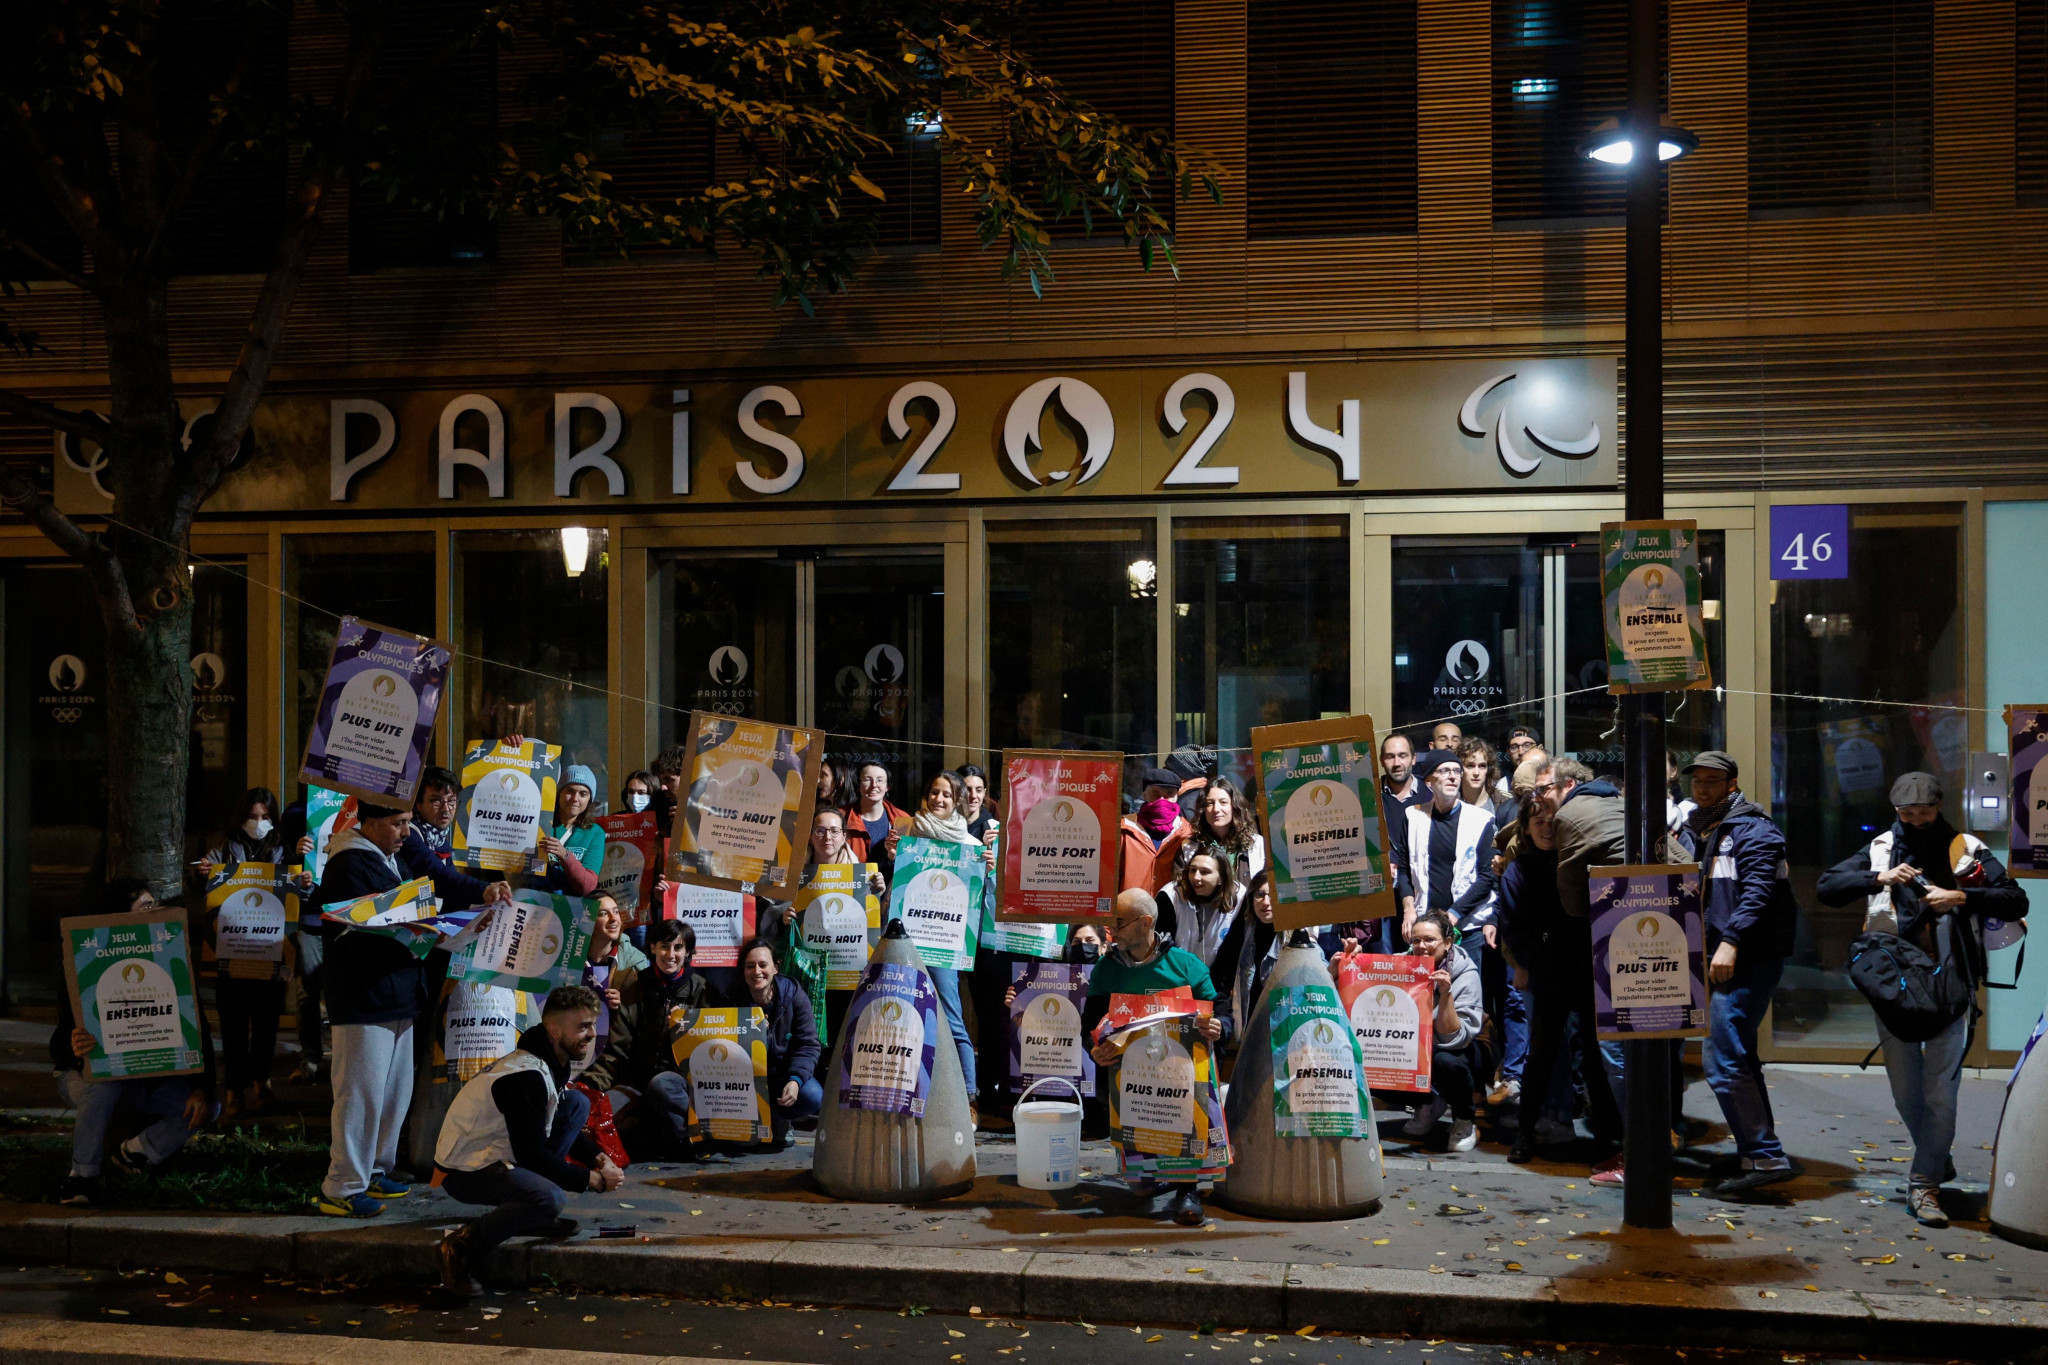 Activists protest at Paris 2024 offices over "social cleansing" concerns